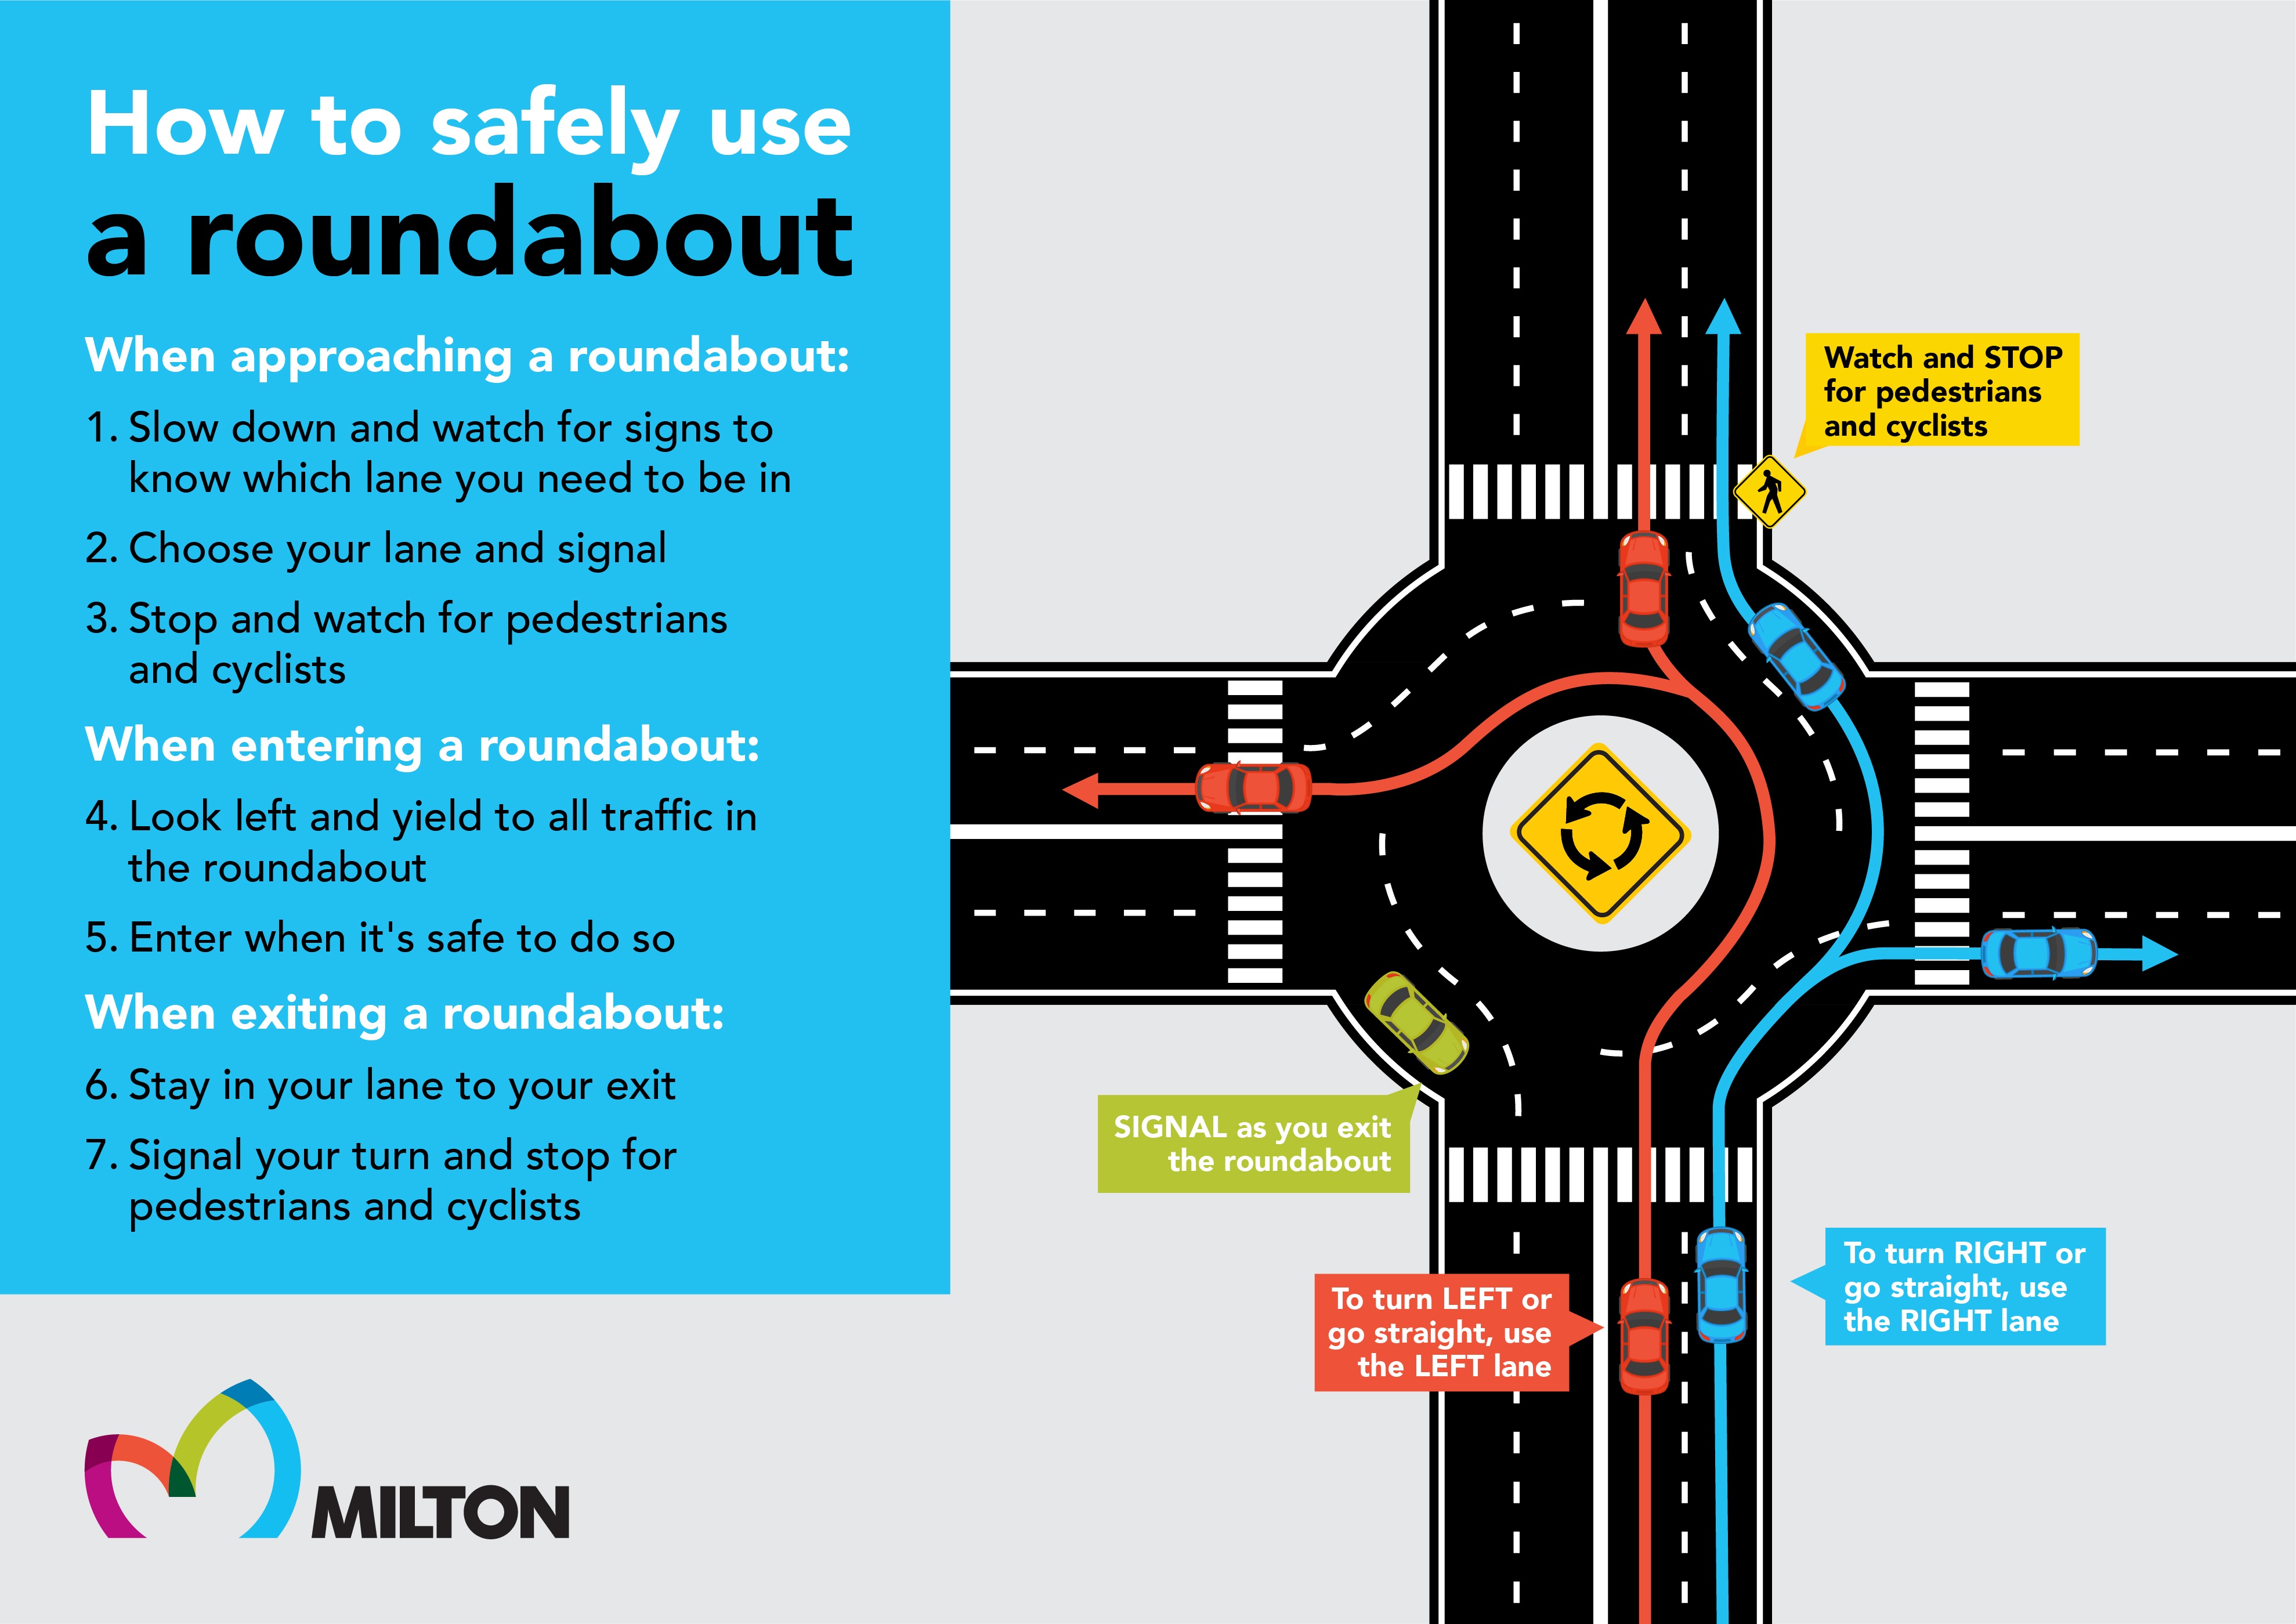 Infographic on how to use a roundabout safely